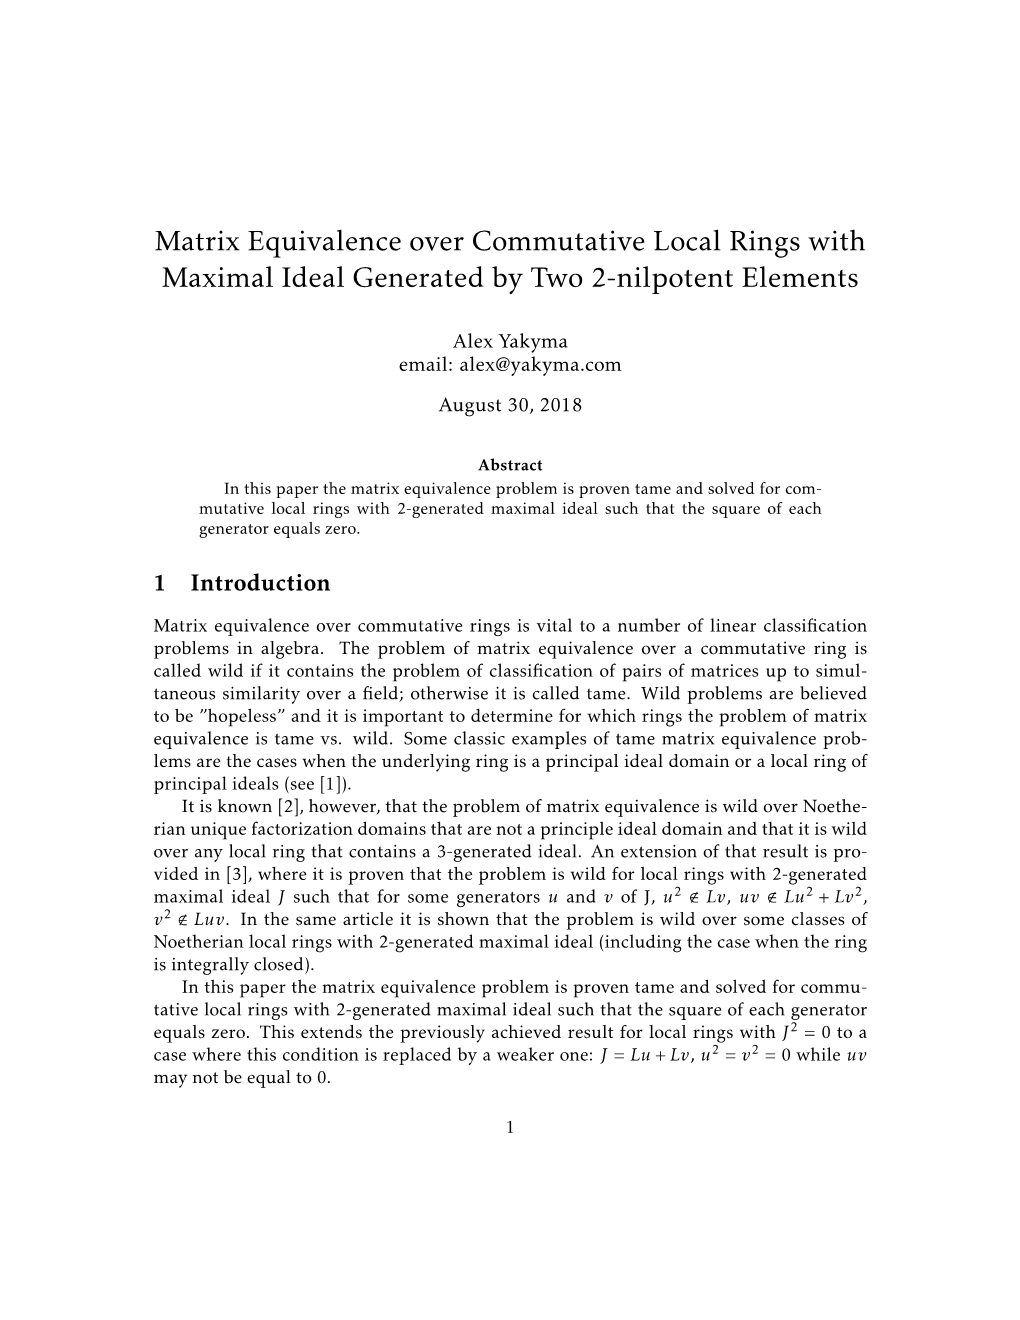 Matrix Equivalence Over Commutative Local Rings with Maximal Ideal Generated by Two 2-Nilpotent Elements